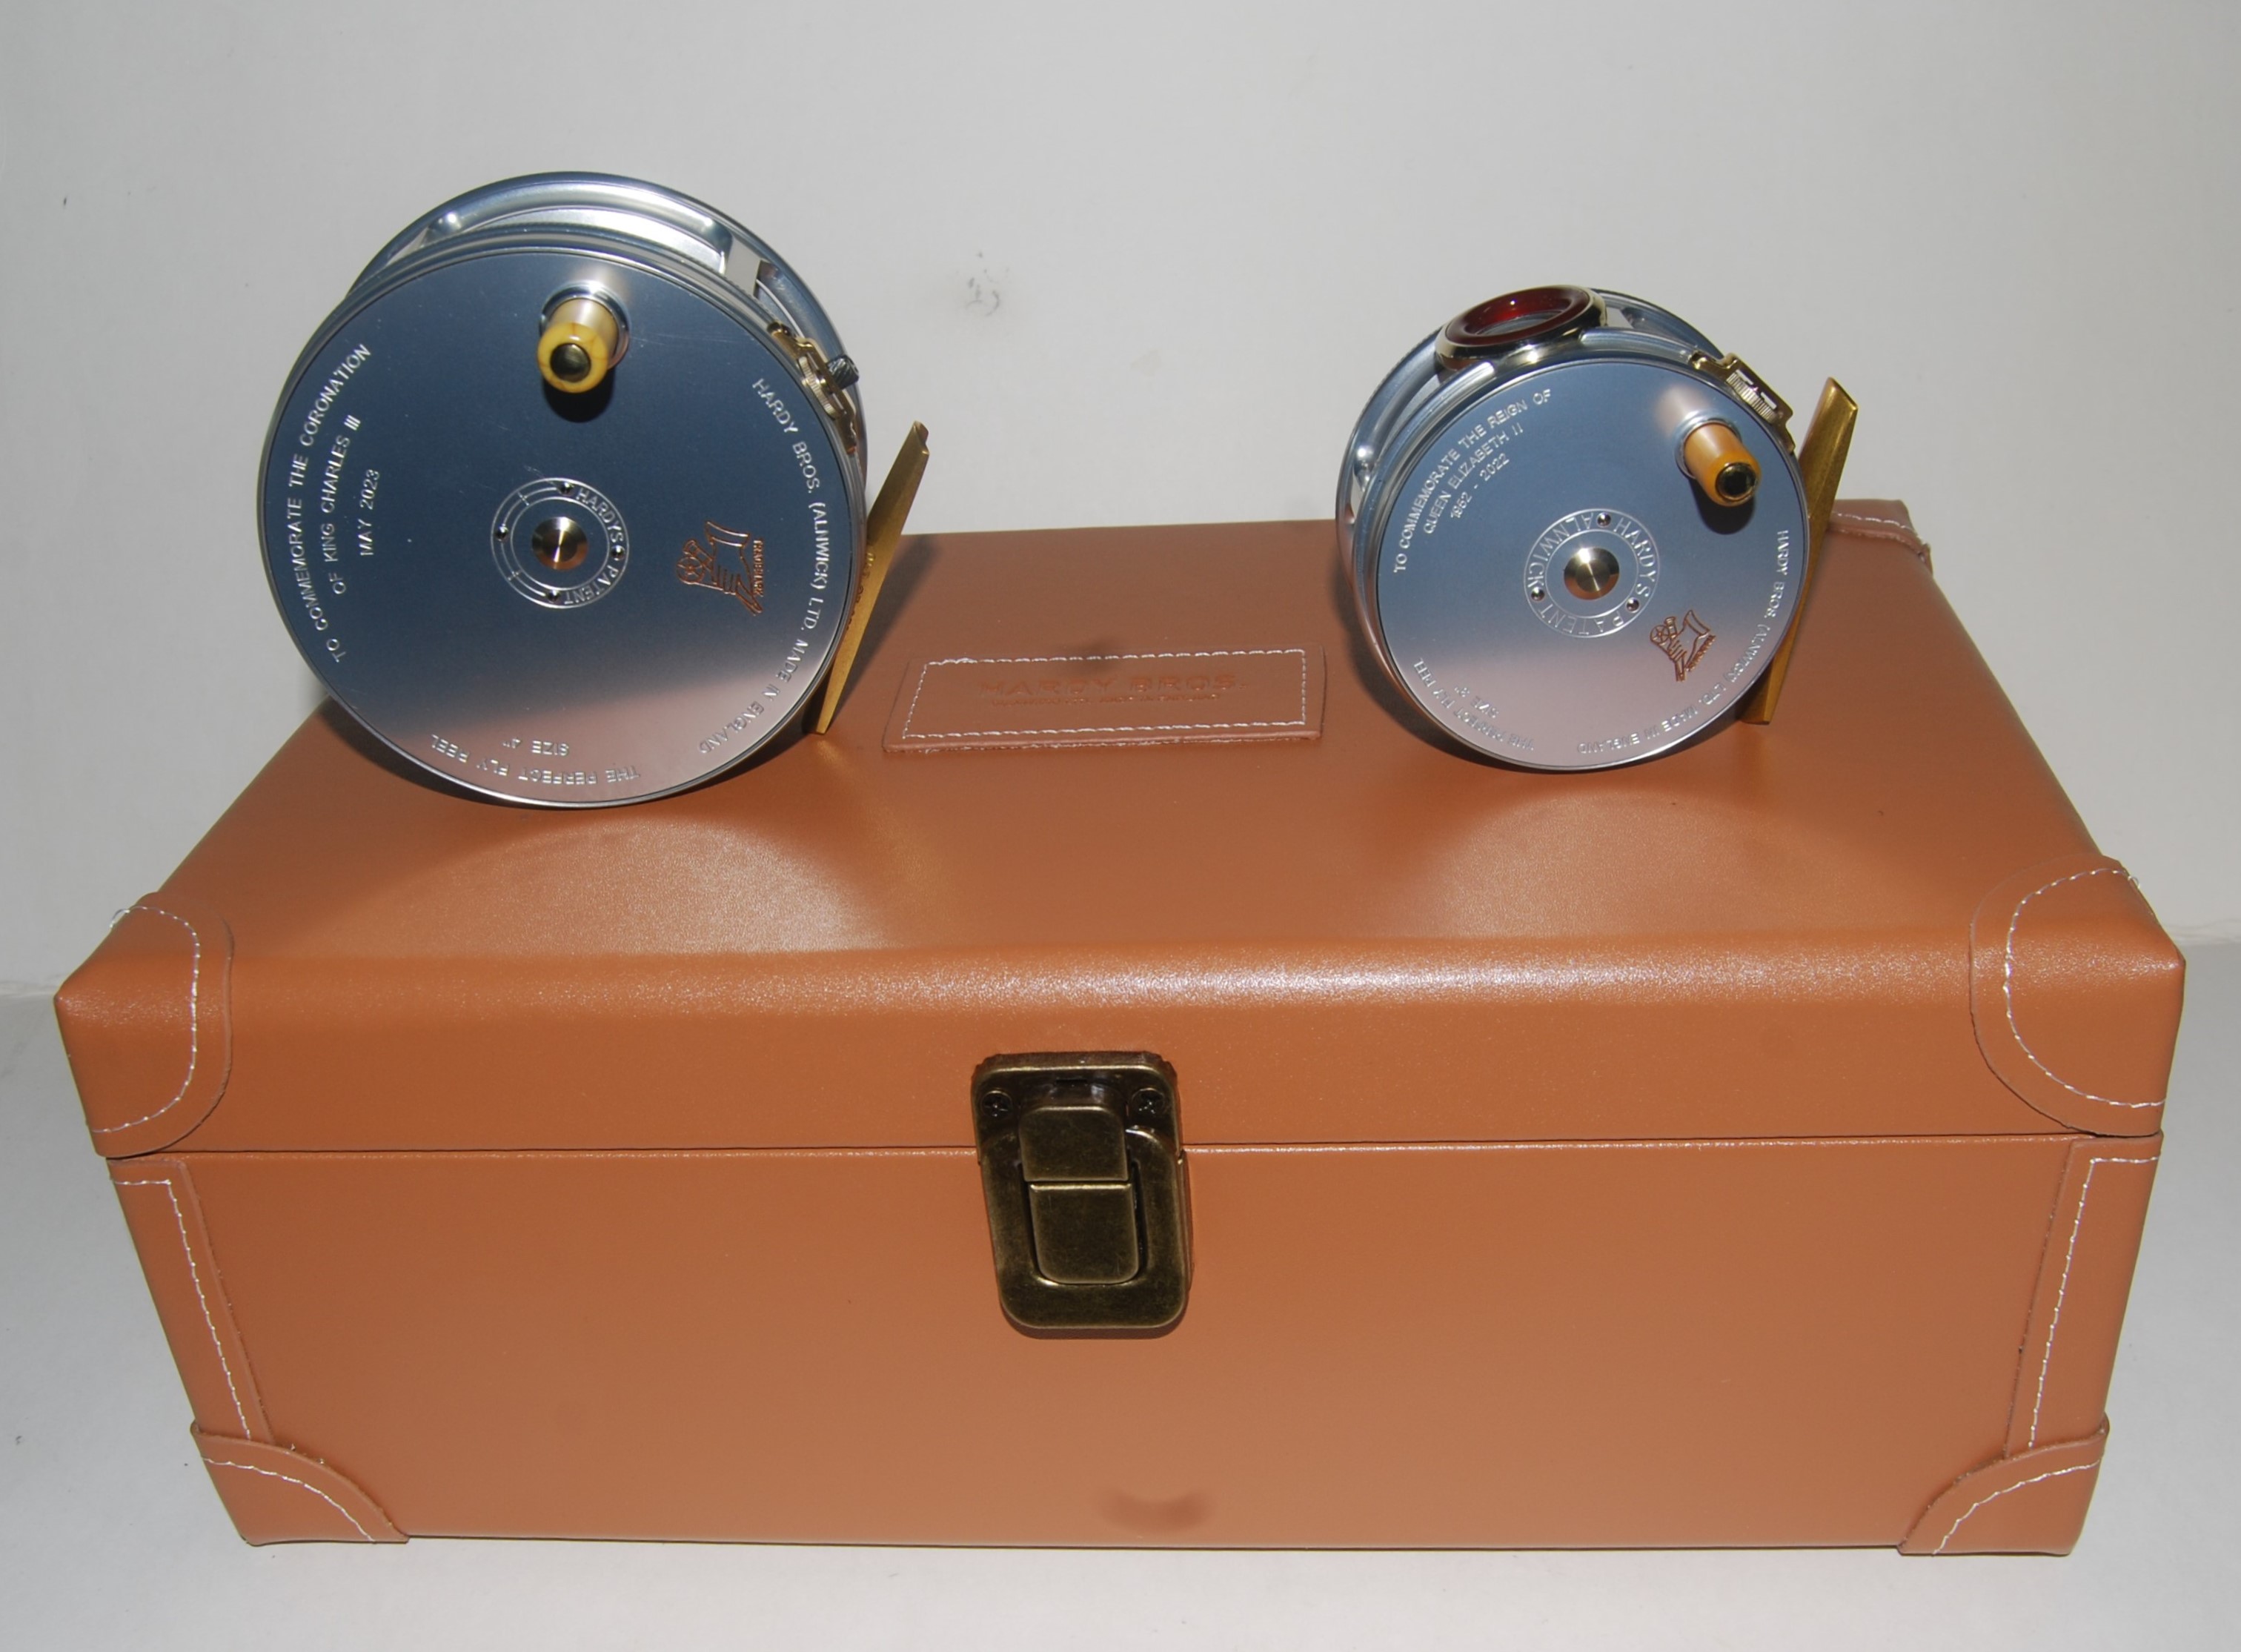 HARDY ROYAL COMMEMORATIVE PERFECT REEL SET. LHW. Limited Edition. One of  250 Sets. Each set consists of two reels: The 3 in. Queen's Reel, and the 4  in. King's Reel